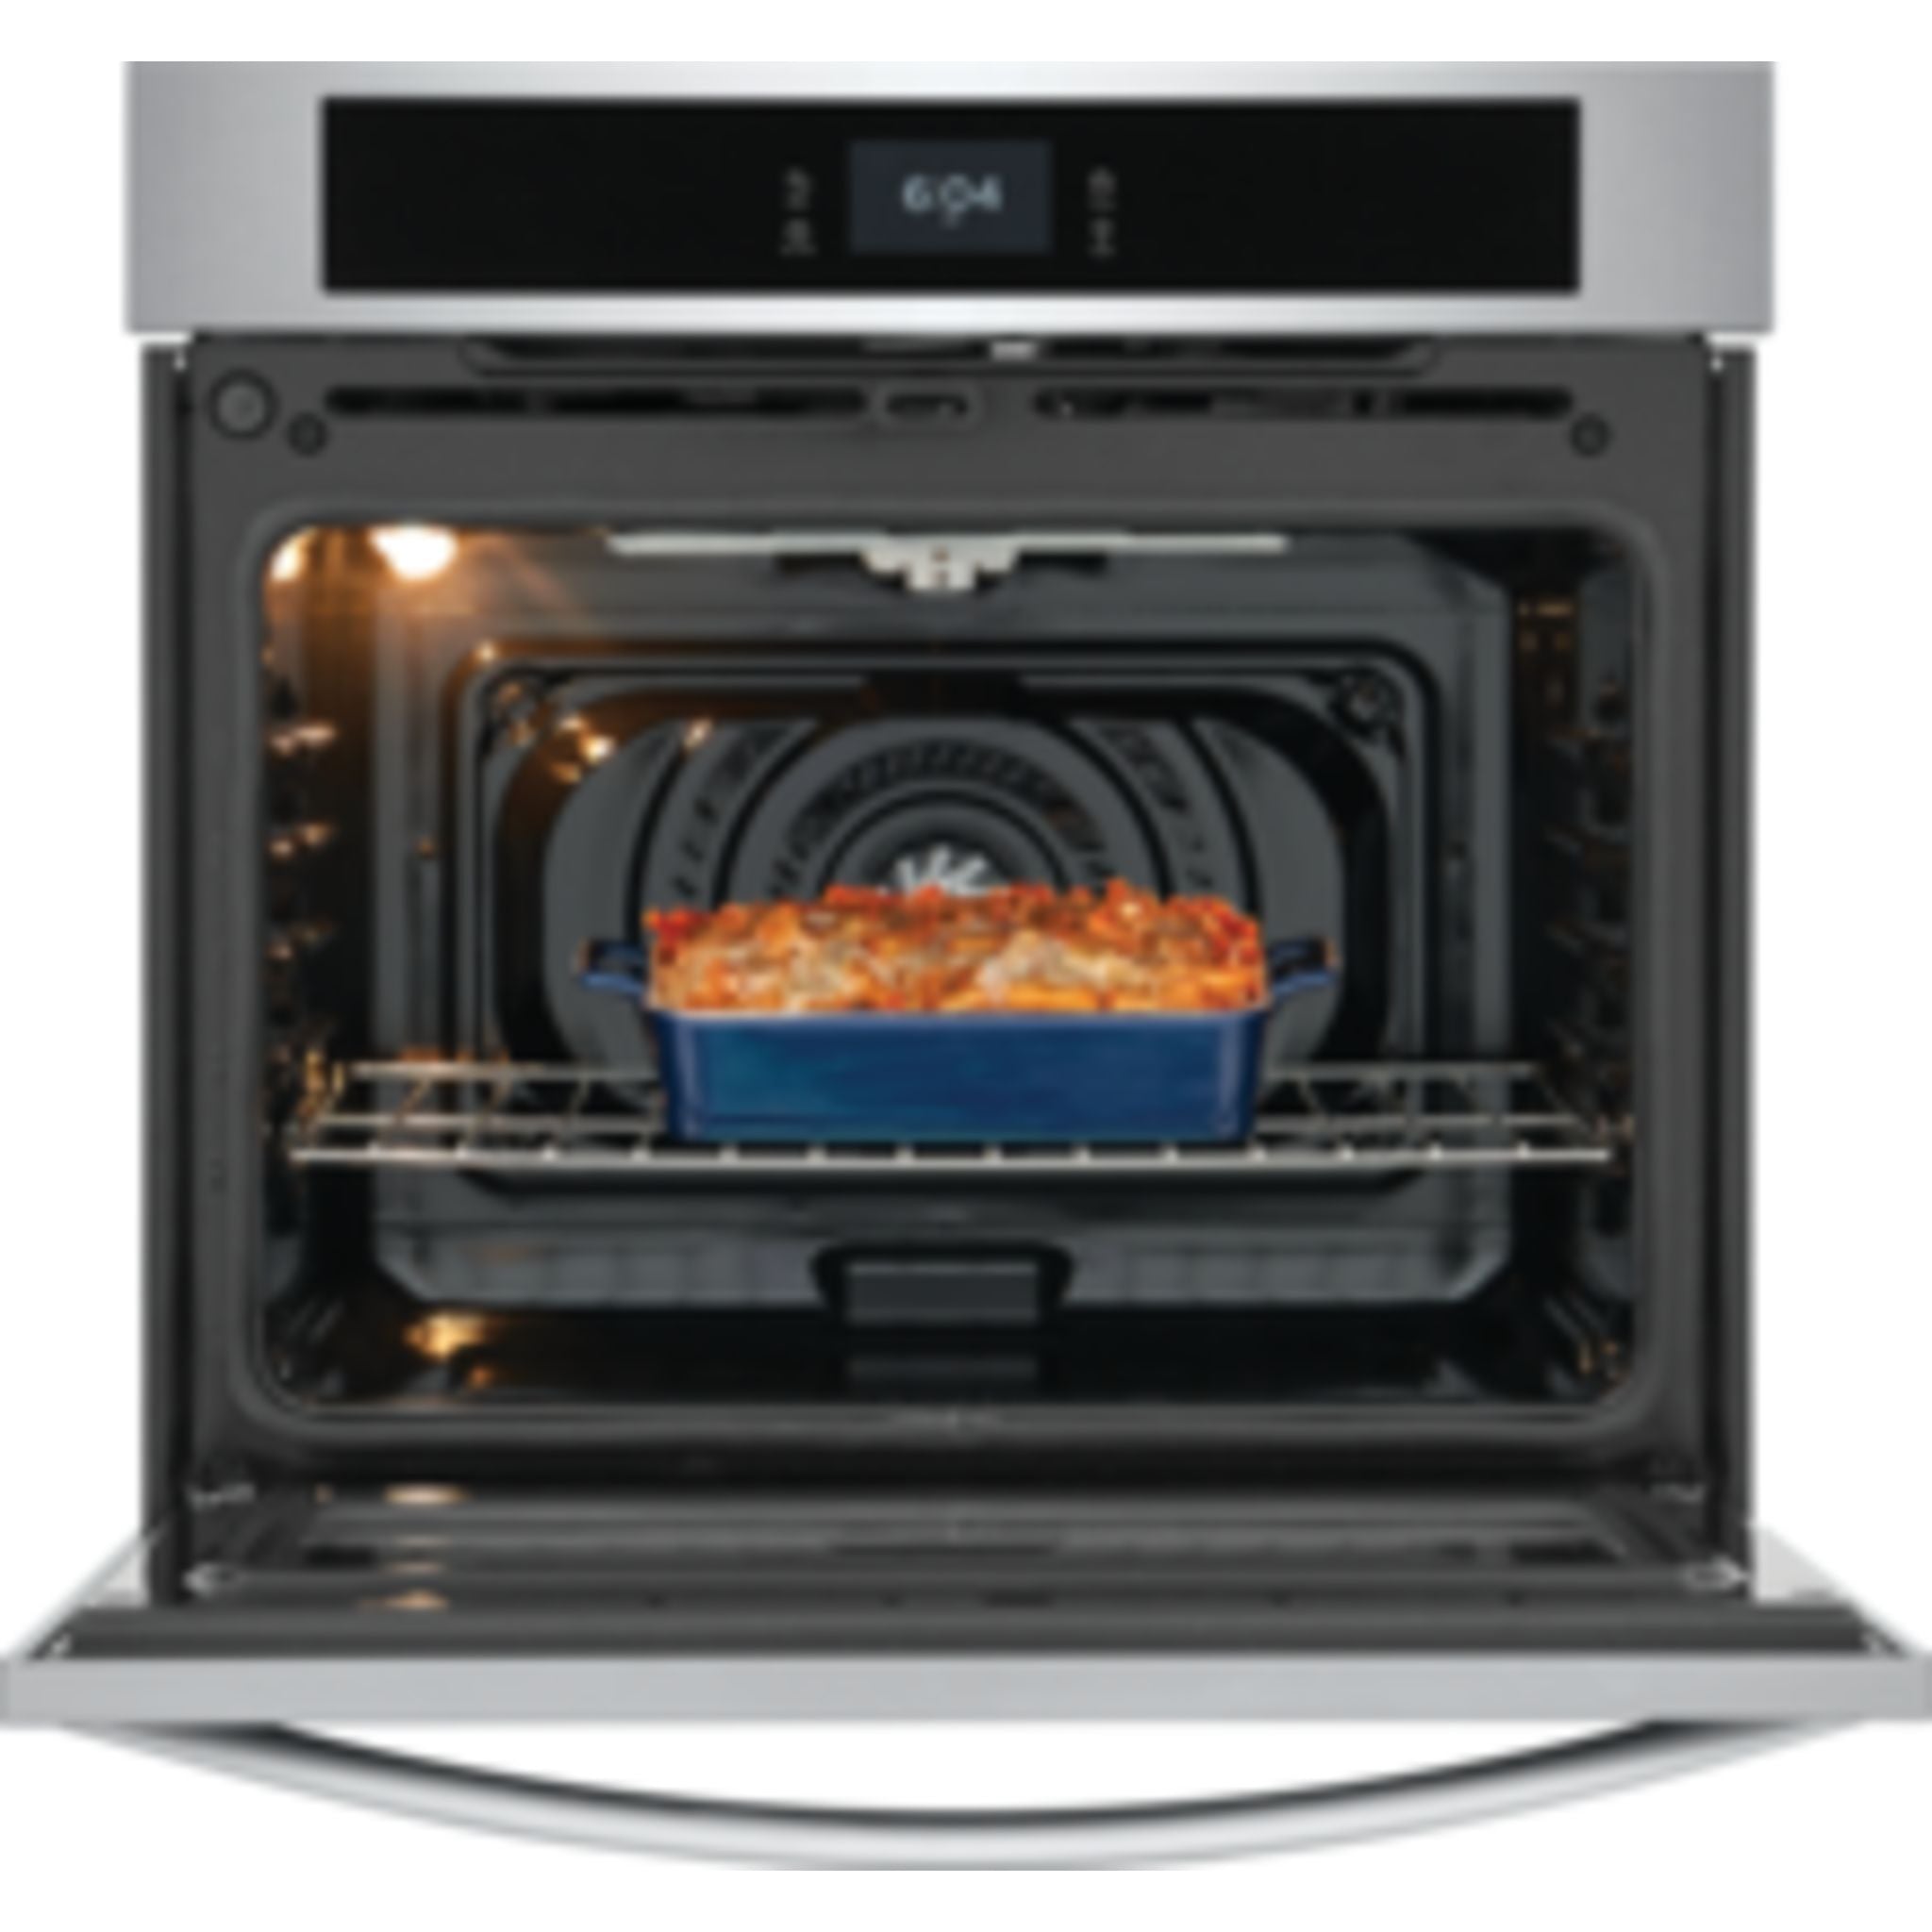 Frigidaire, Frigidaire 30" Convection Wall Oven (FCWS3027AS) - Stainless Steel